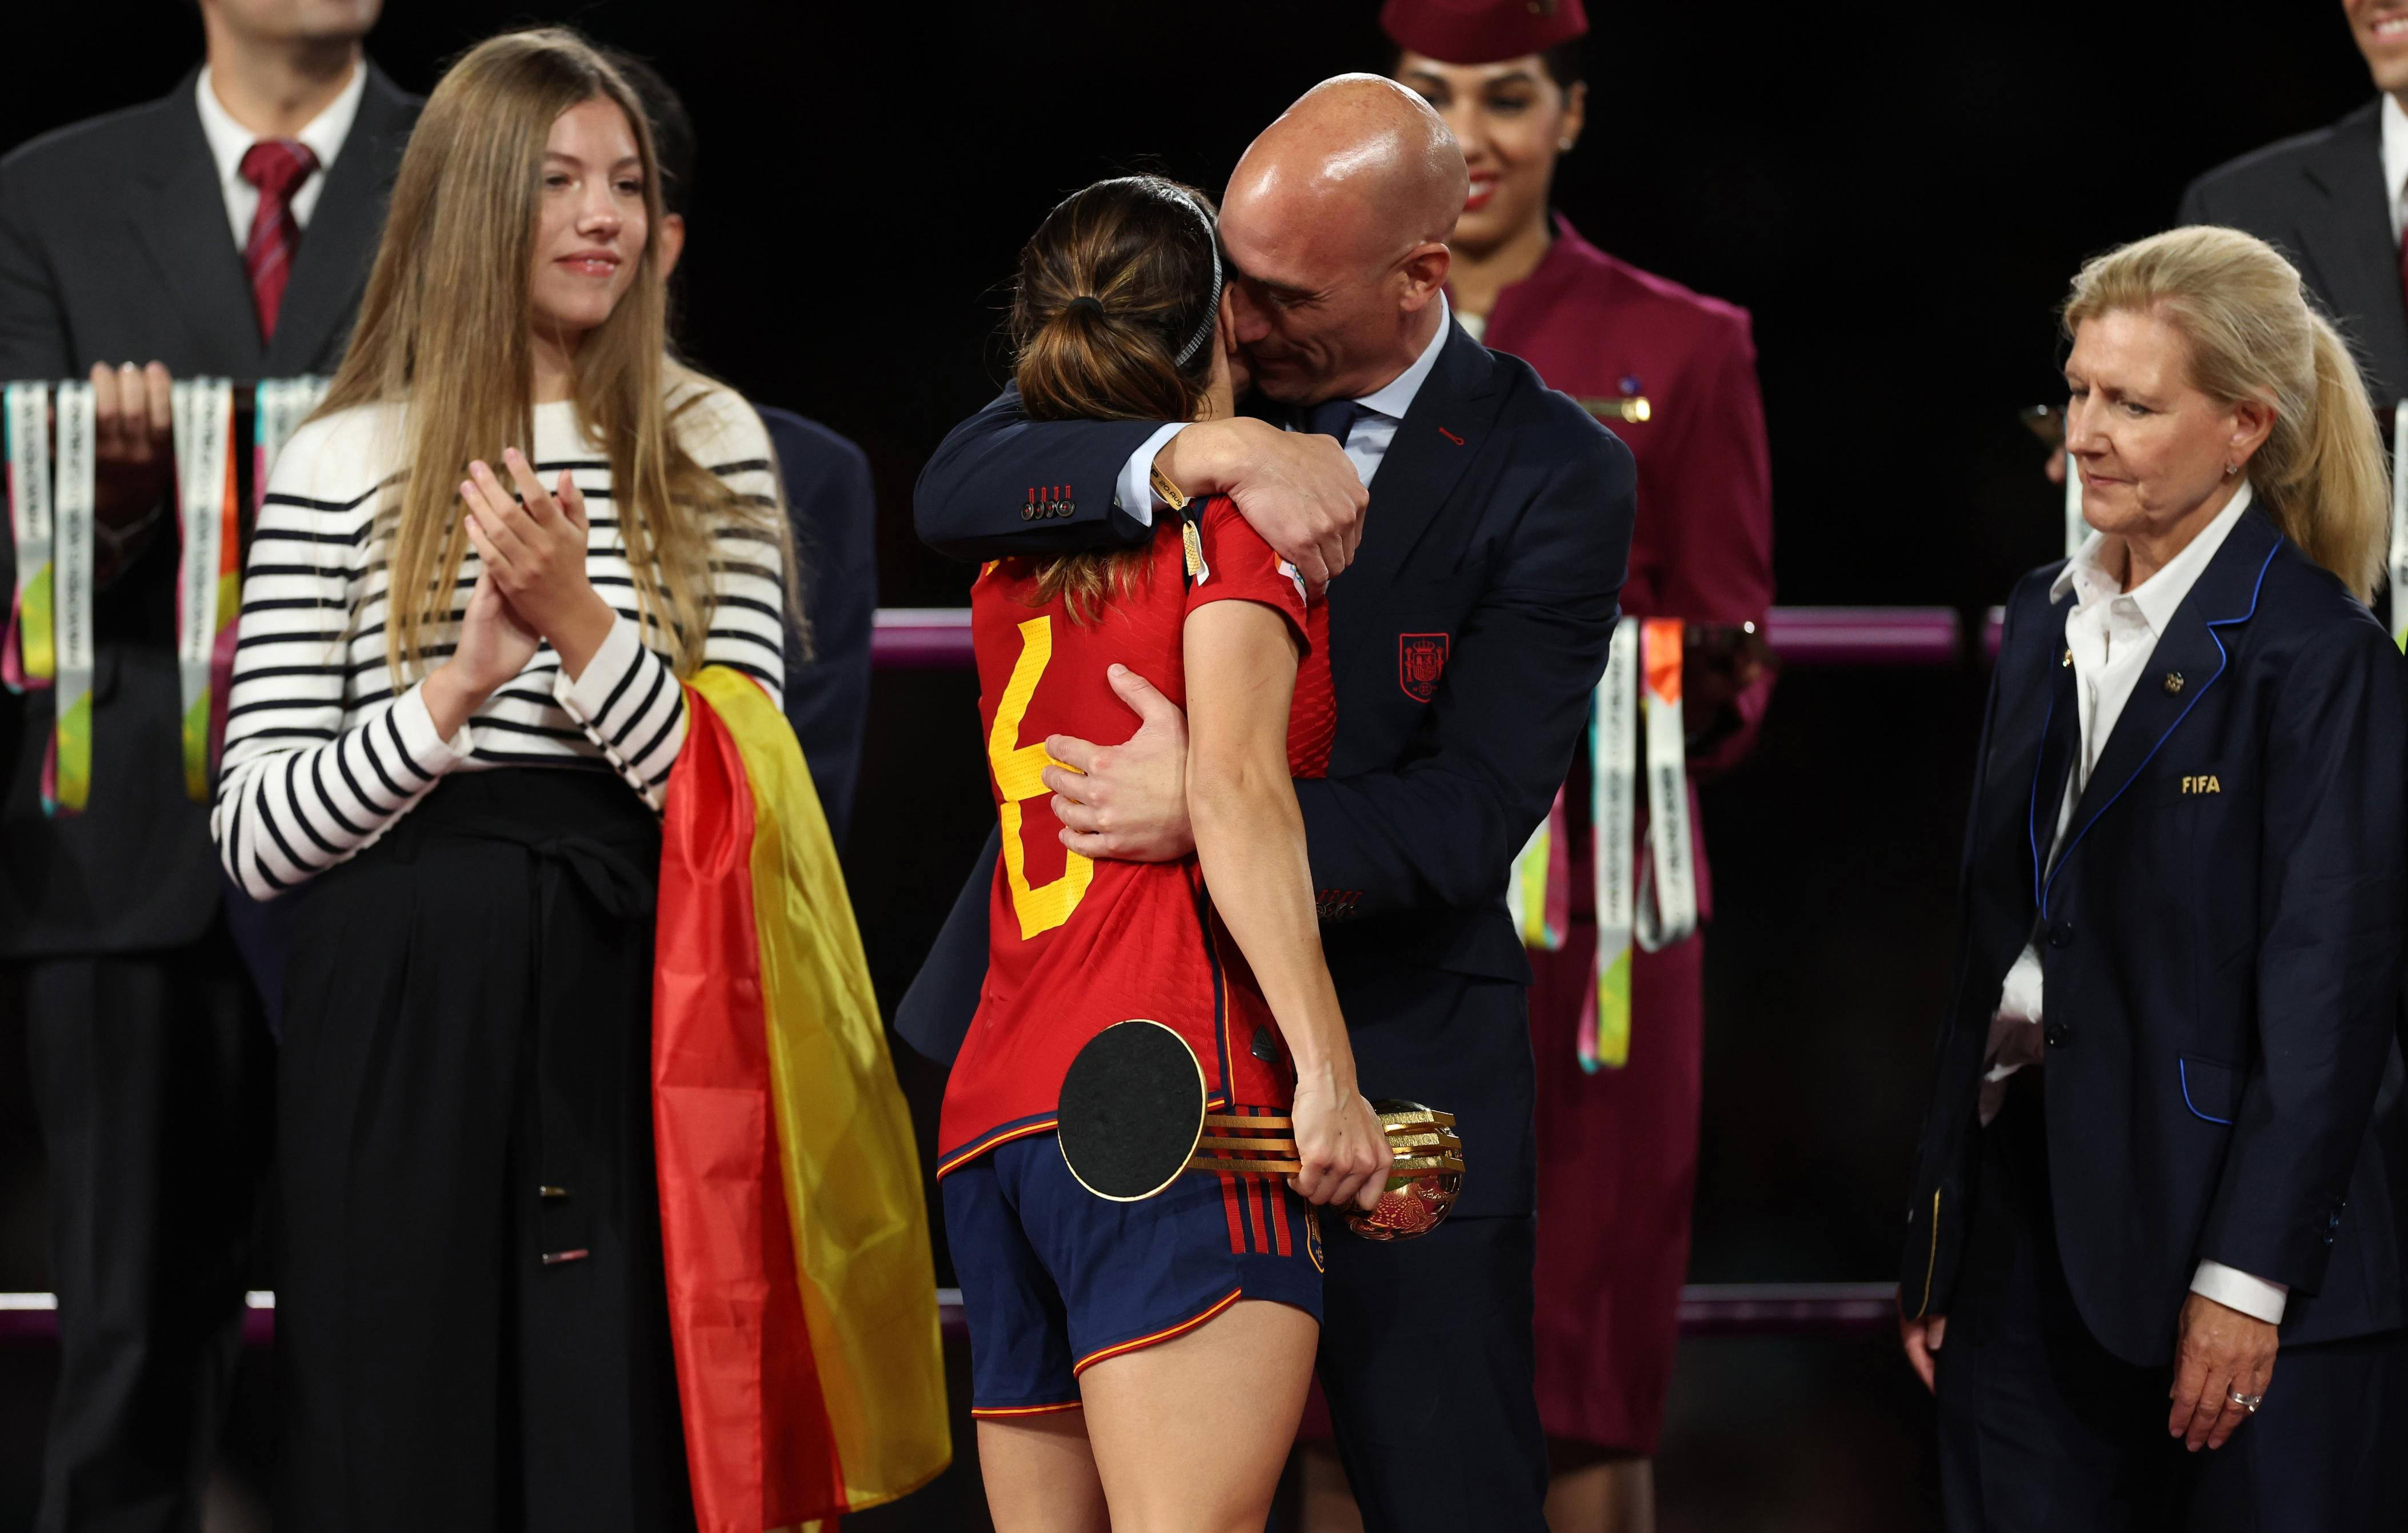 Spanish Soccer Head Apologizes For Kissing Player After World Cup Win